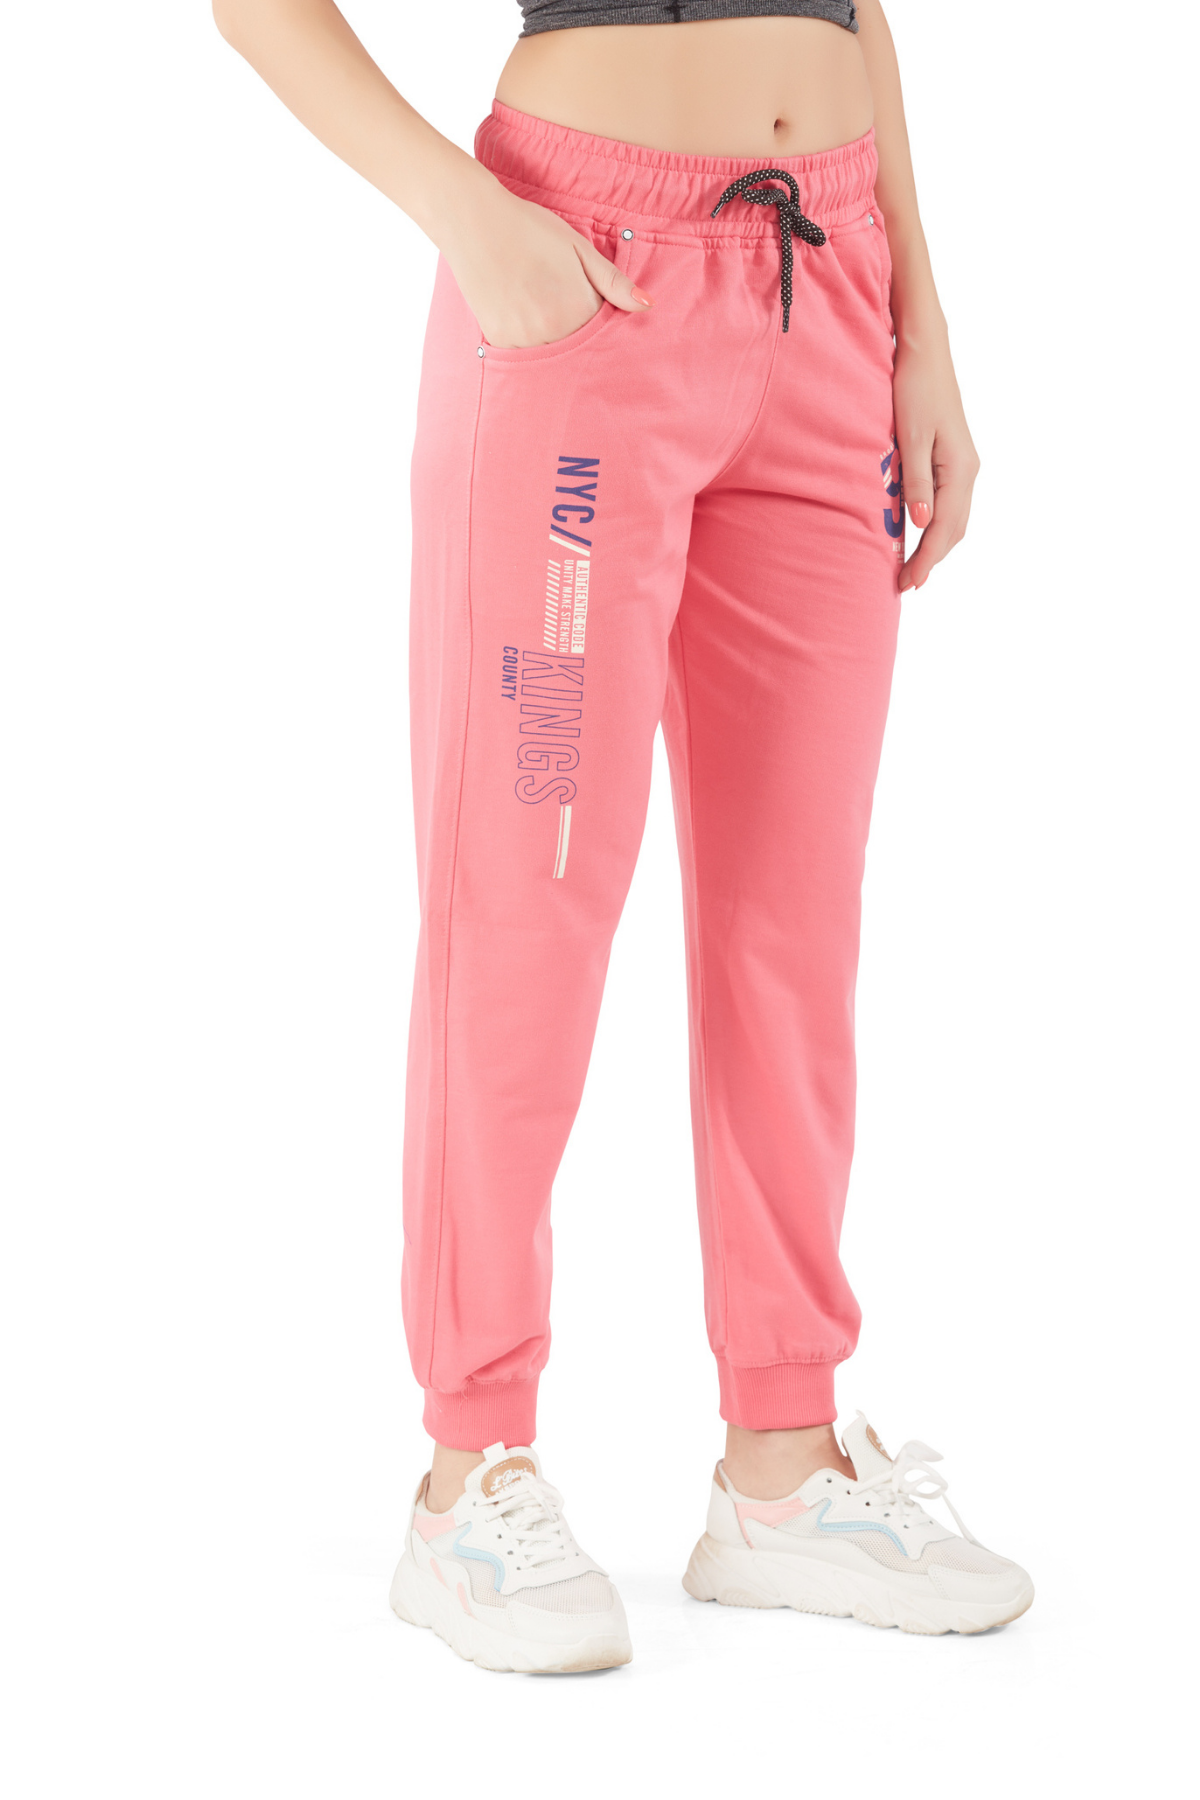 Comfortable Pink Regular Fit Cotton Joggers for women with pockets online in India